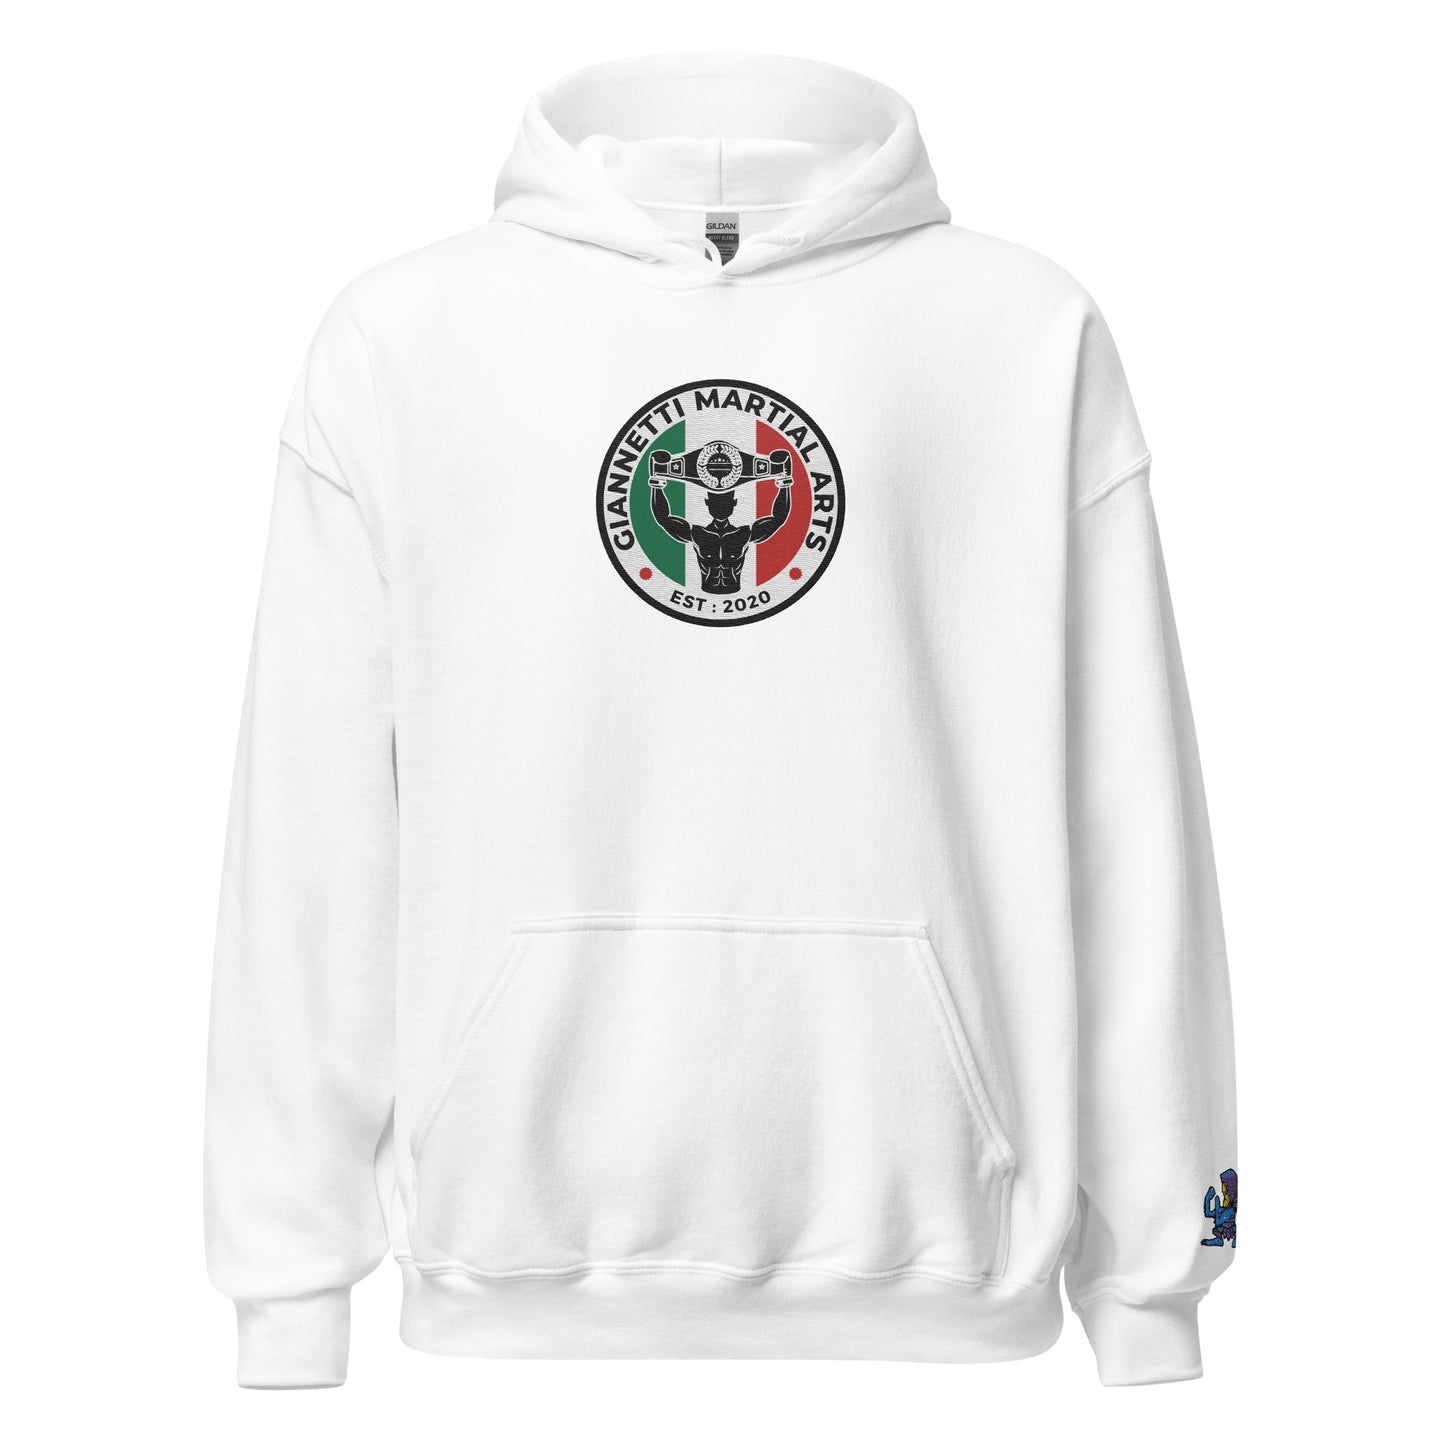 Giannetti Martial Arts Hoodie